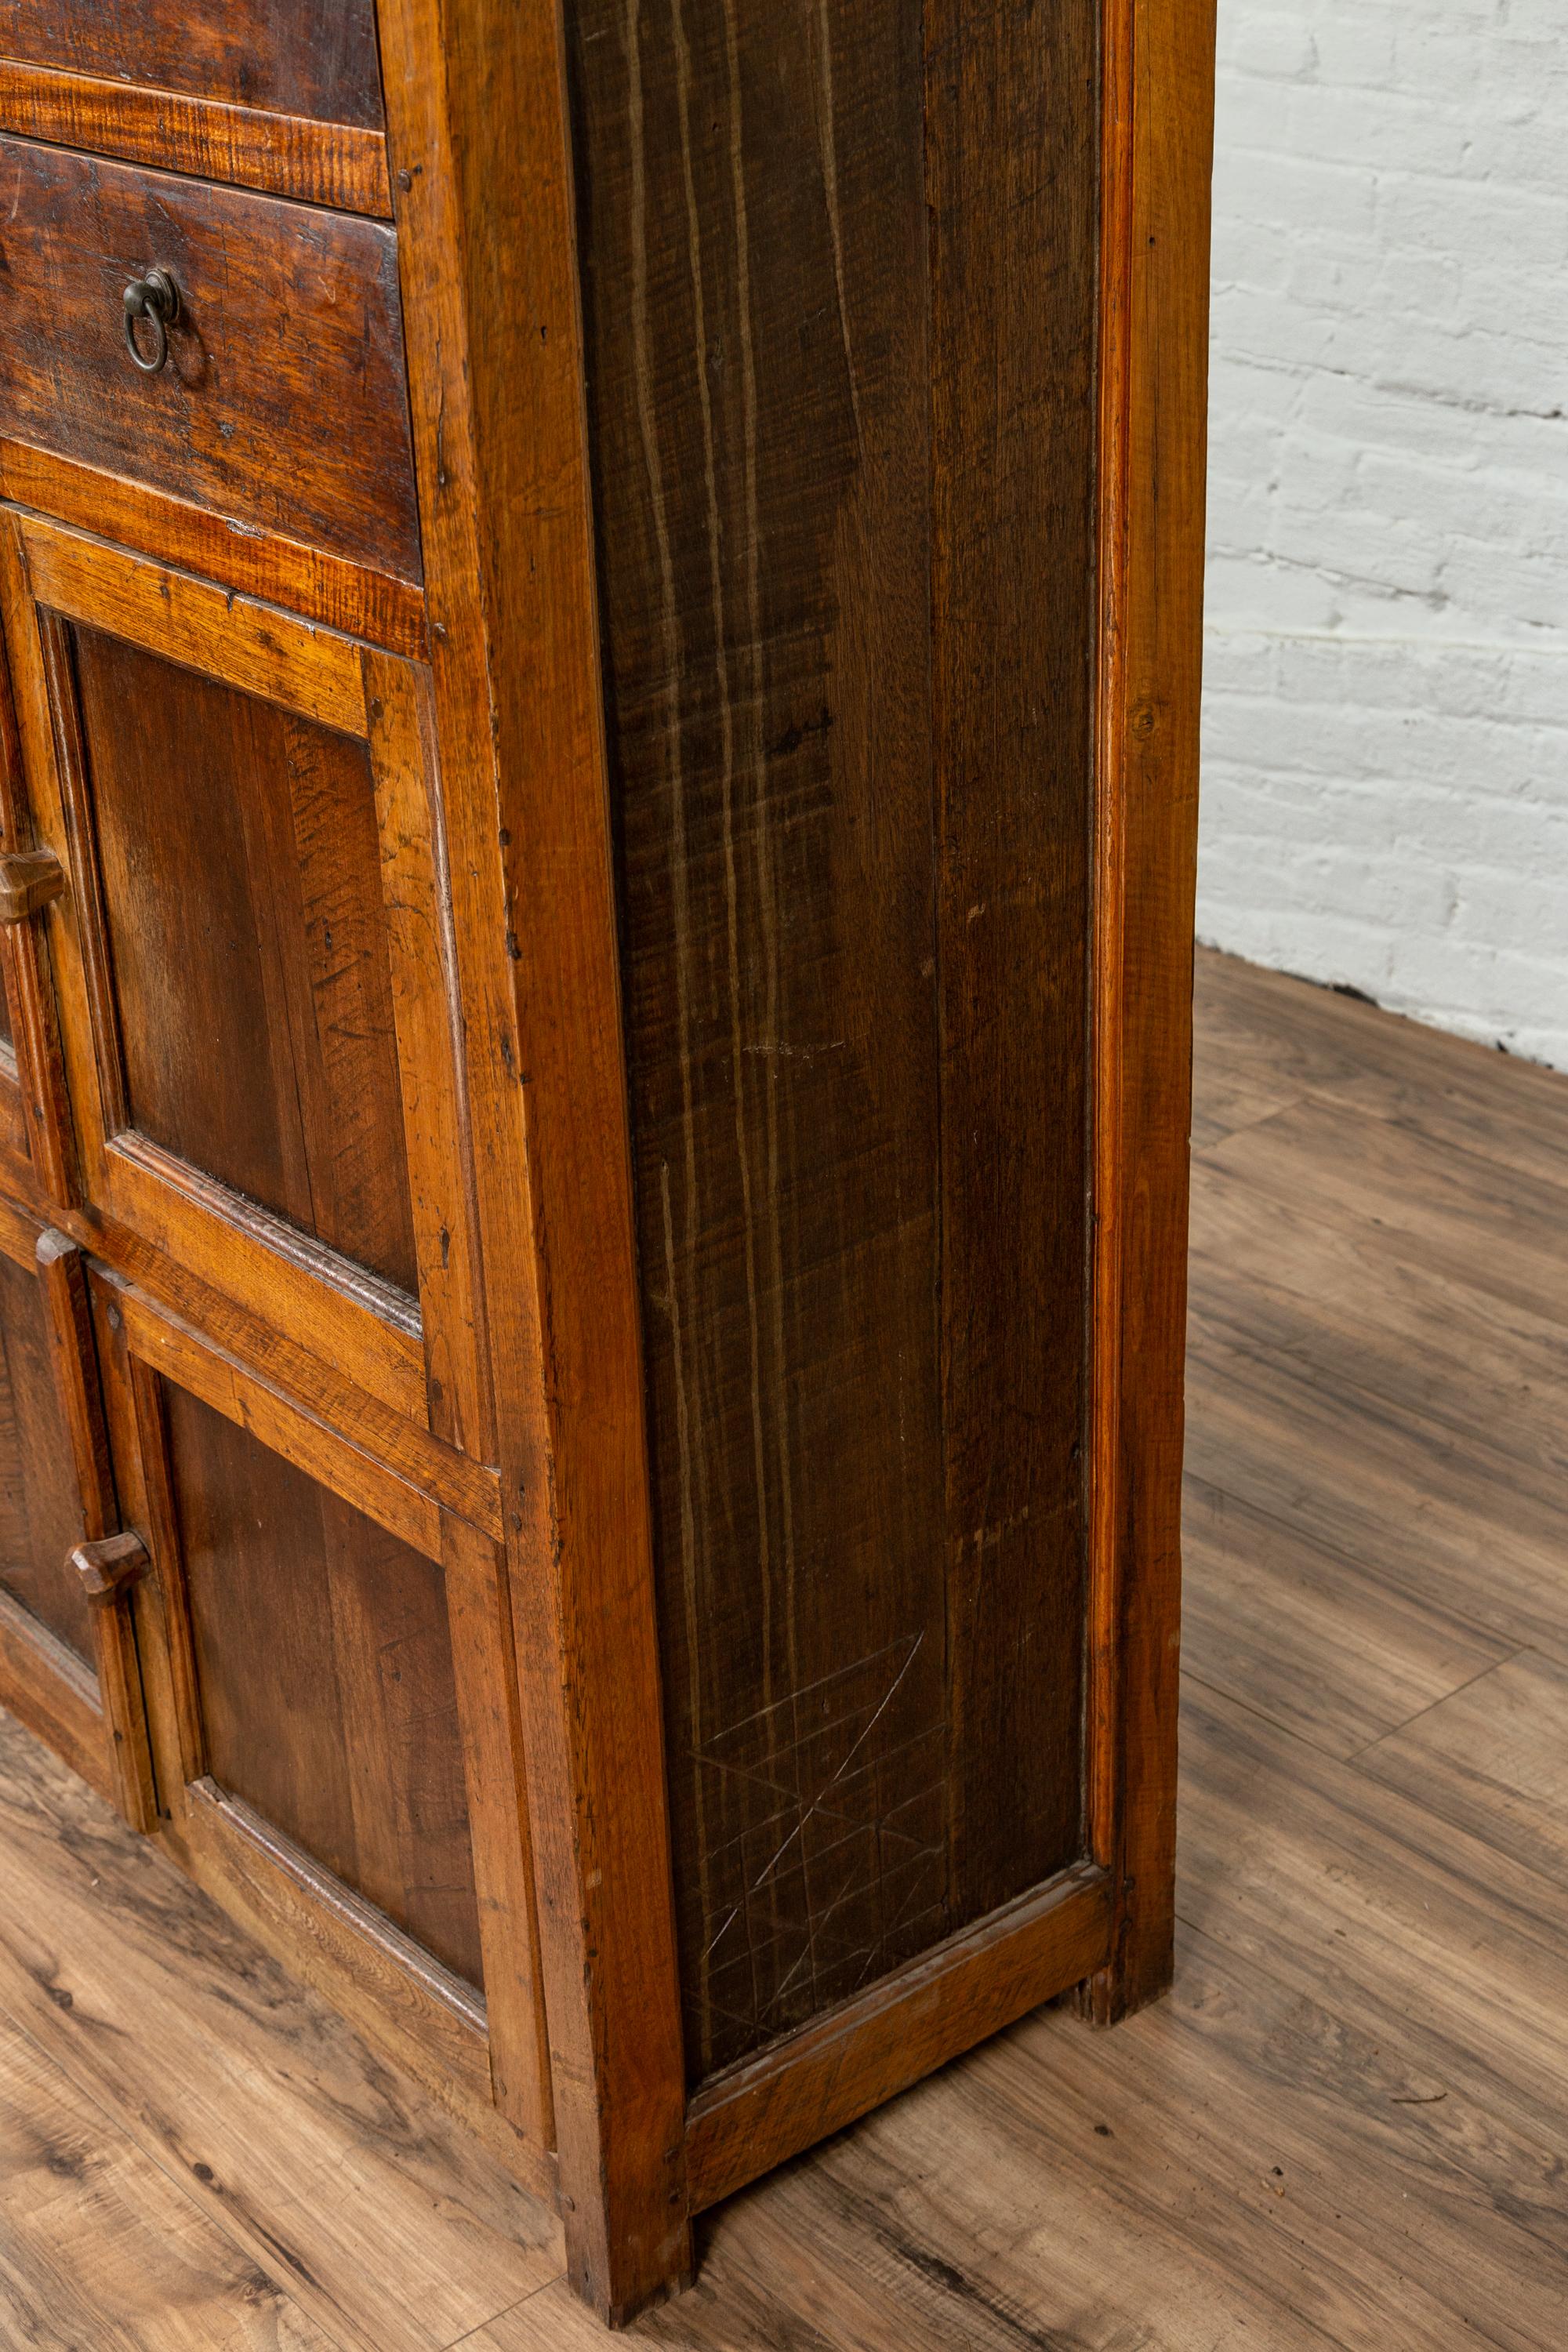 Tall Antique Javanese Teak Wood Cabinet with Four Double Doors and Drawers 11